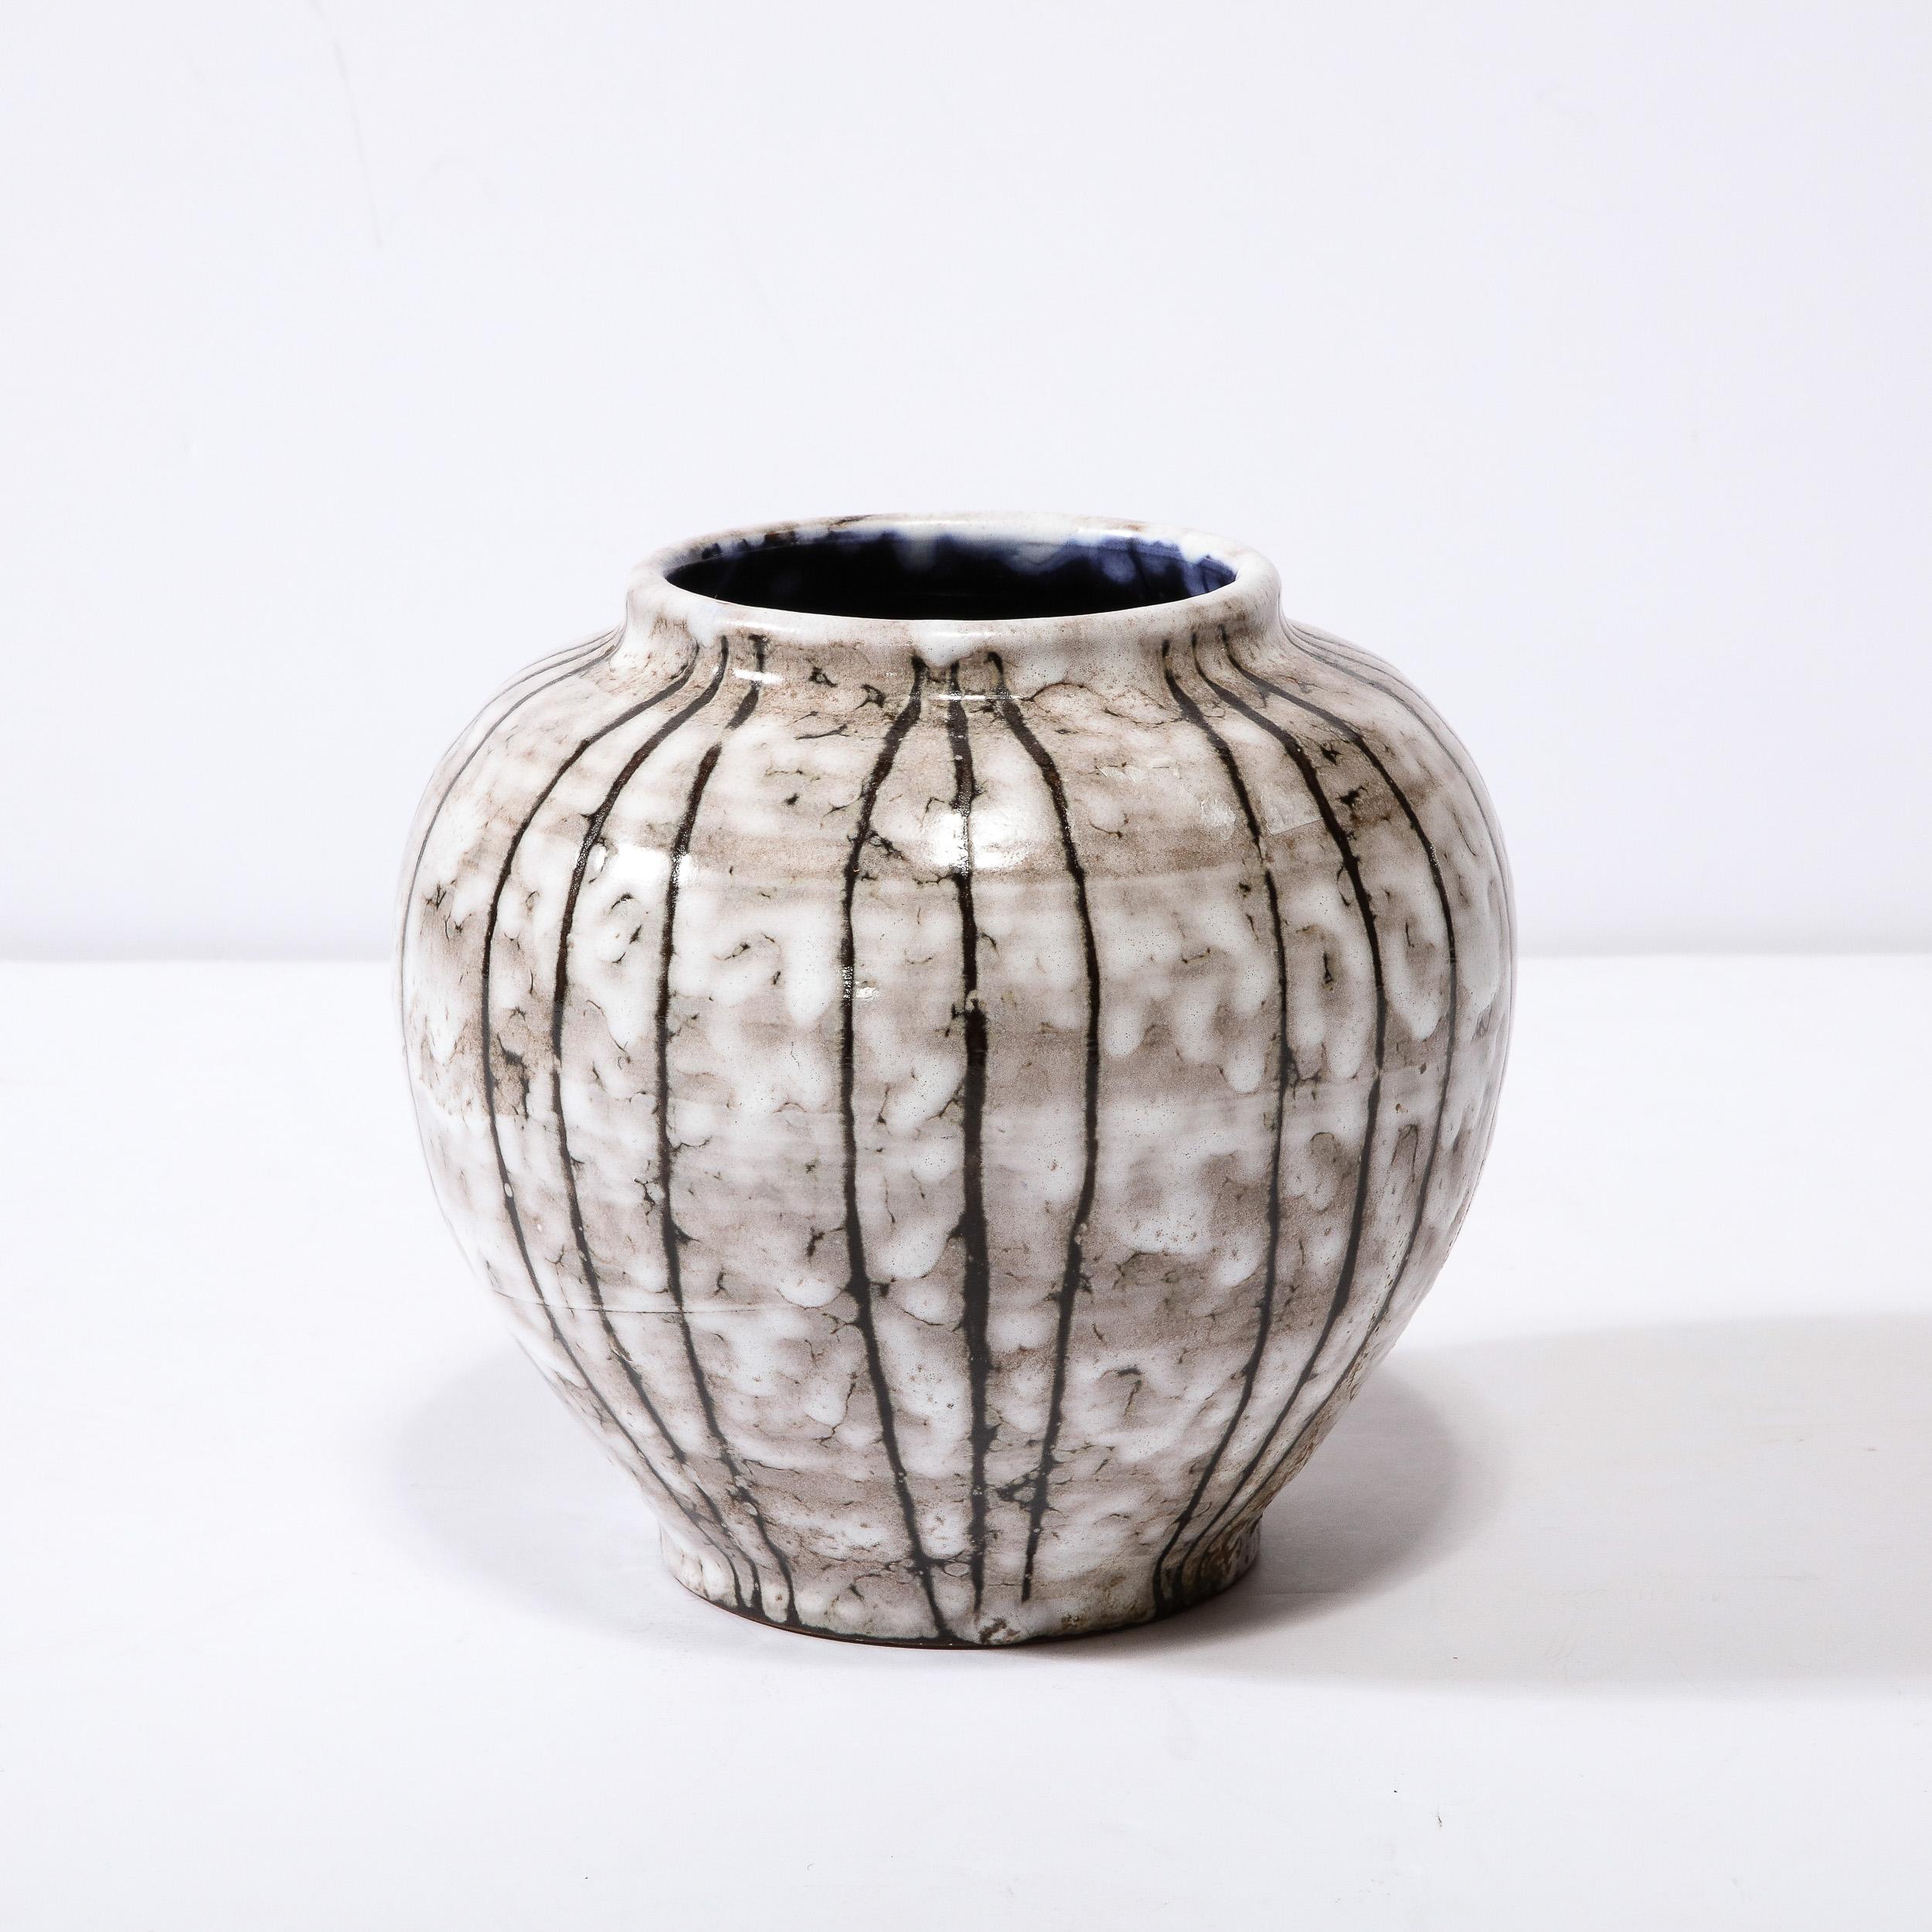 Glazed Mid-Century Modernist White and Earth Toned Ceramic Vase W/ Bowed Line Work For Sale